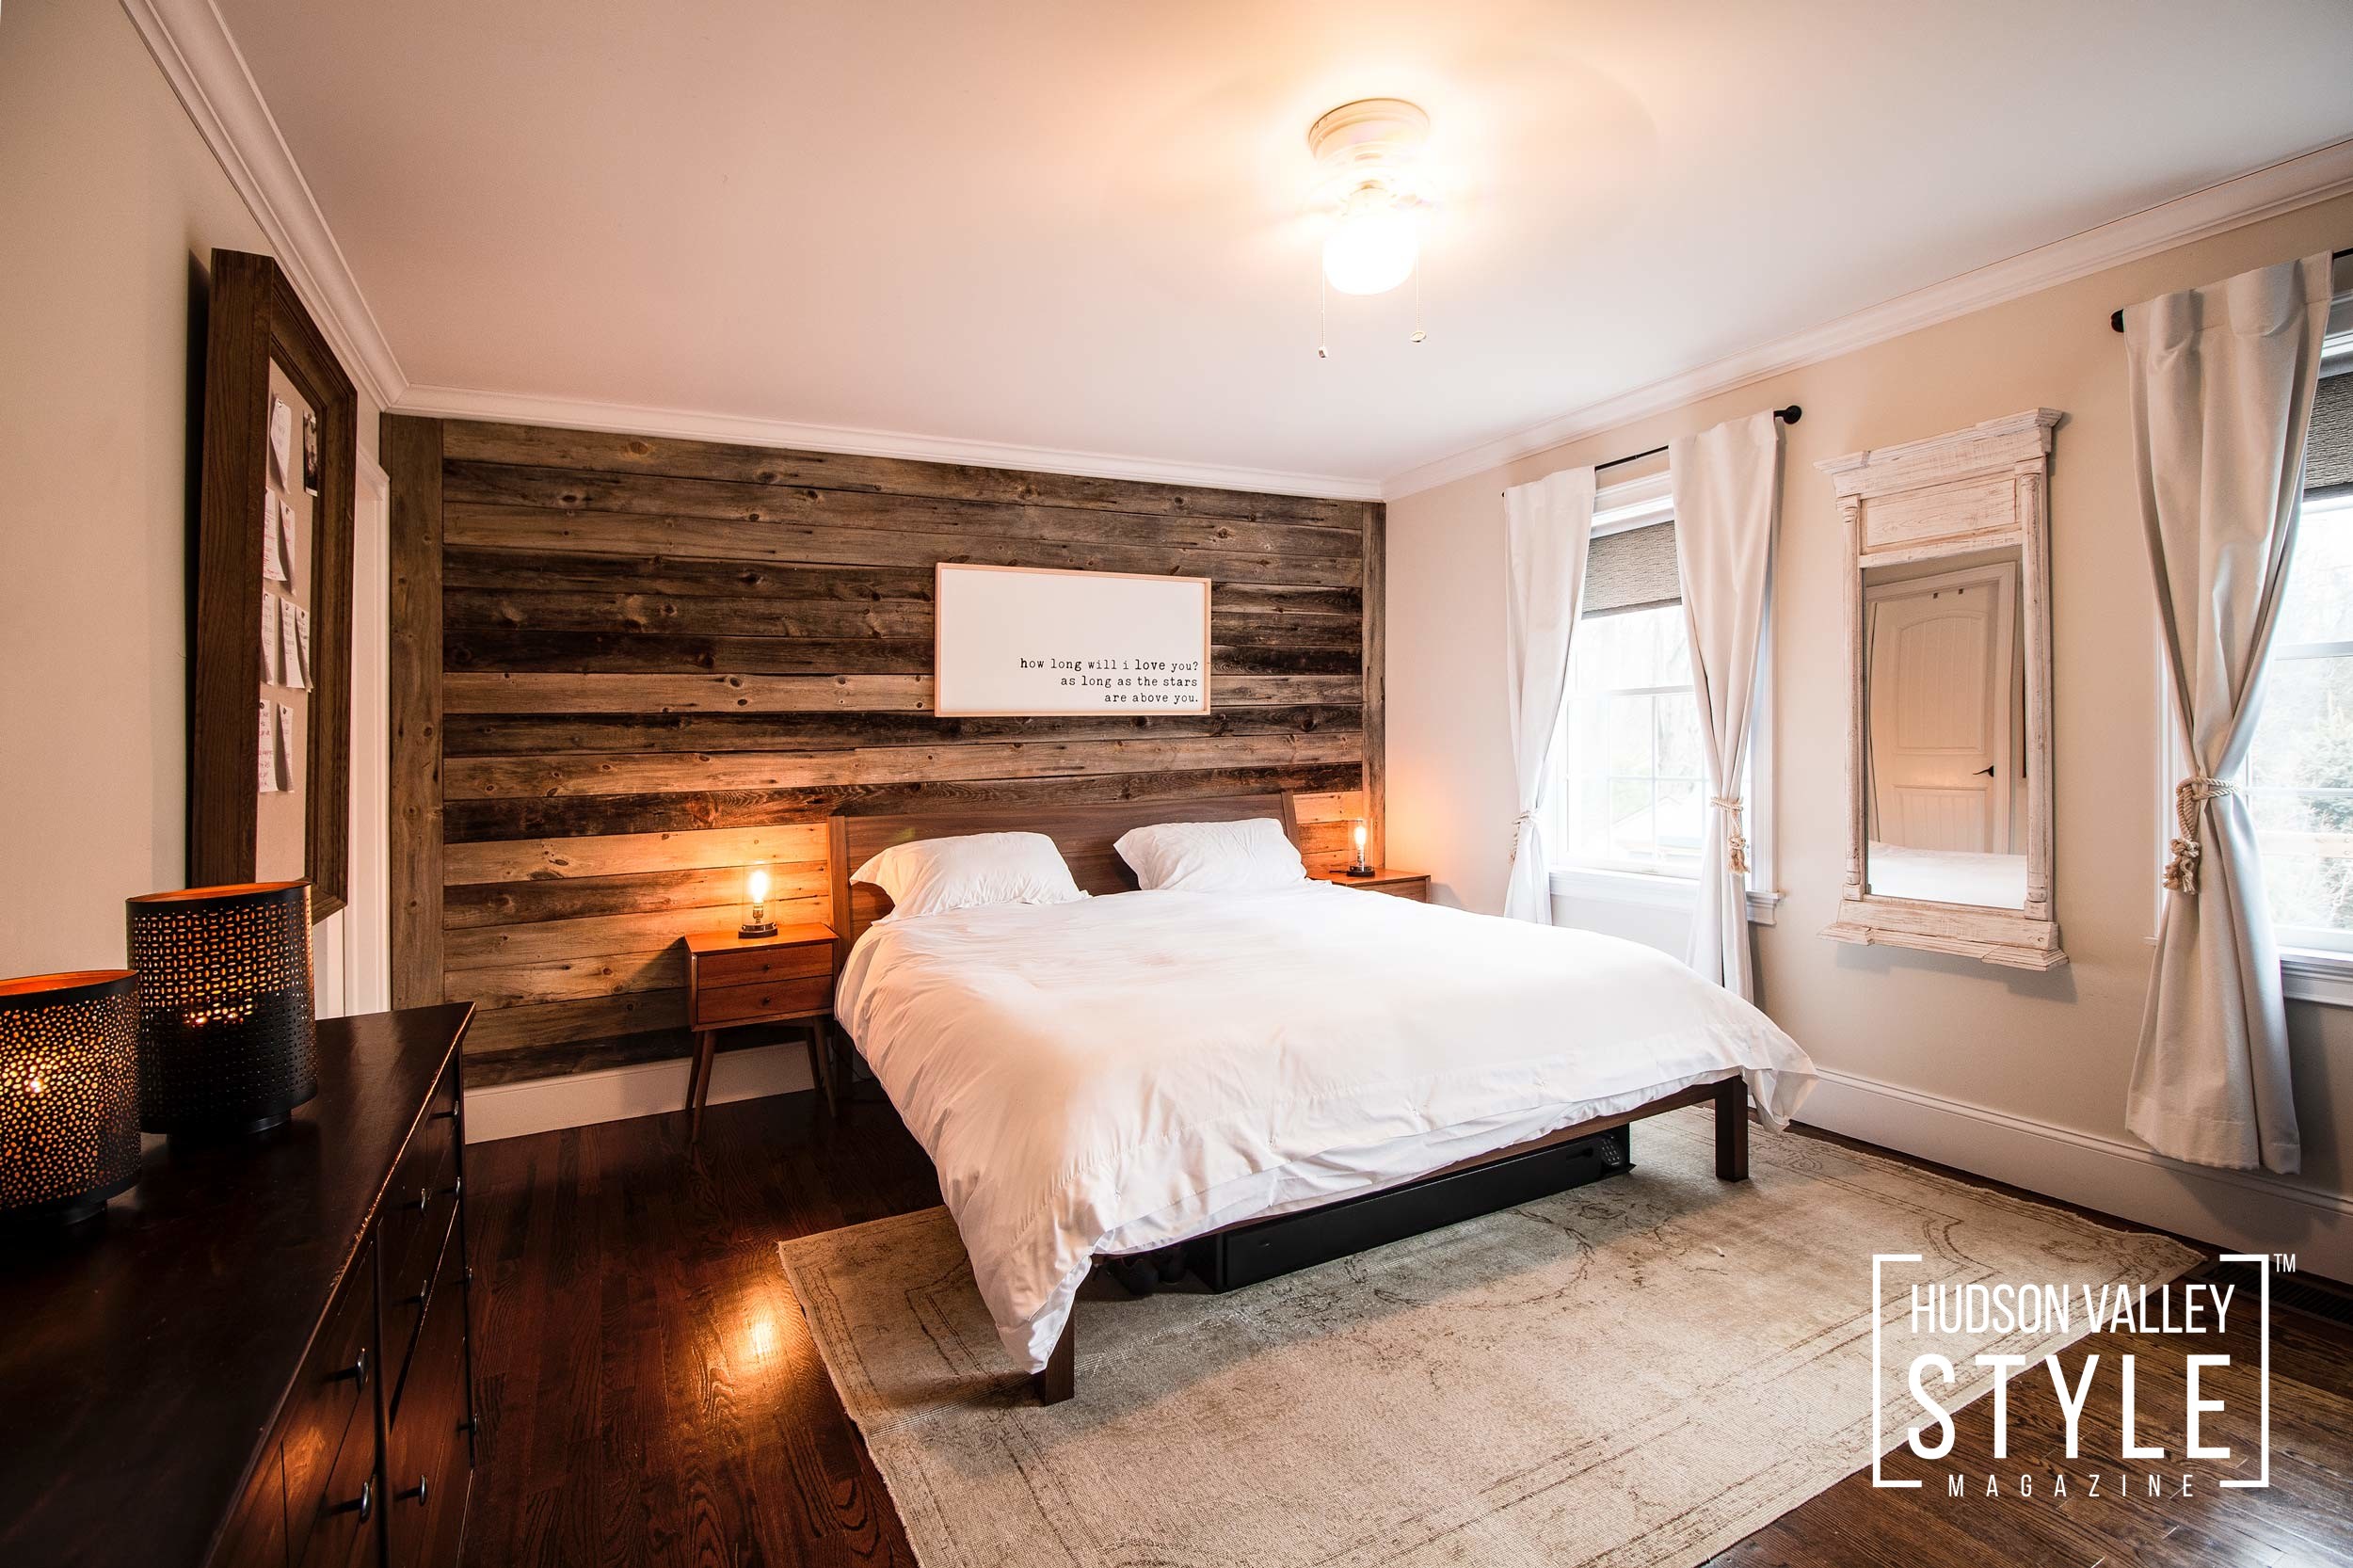 Master Bedroom - Reclaimed Wood Feature Wall - Modern Rustic Interior Design - Luxury Hudson Valley Home for Sale - Almax Realty - The Best Real Estate in the Hudson Valley